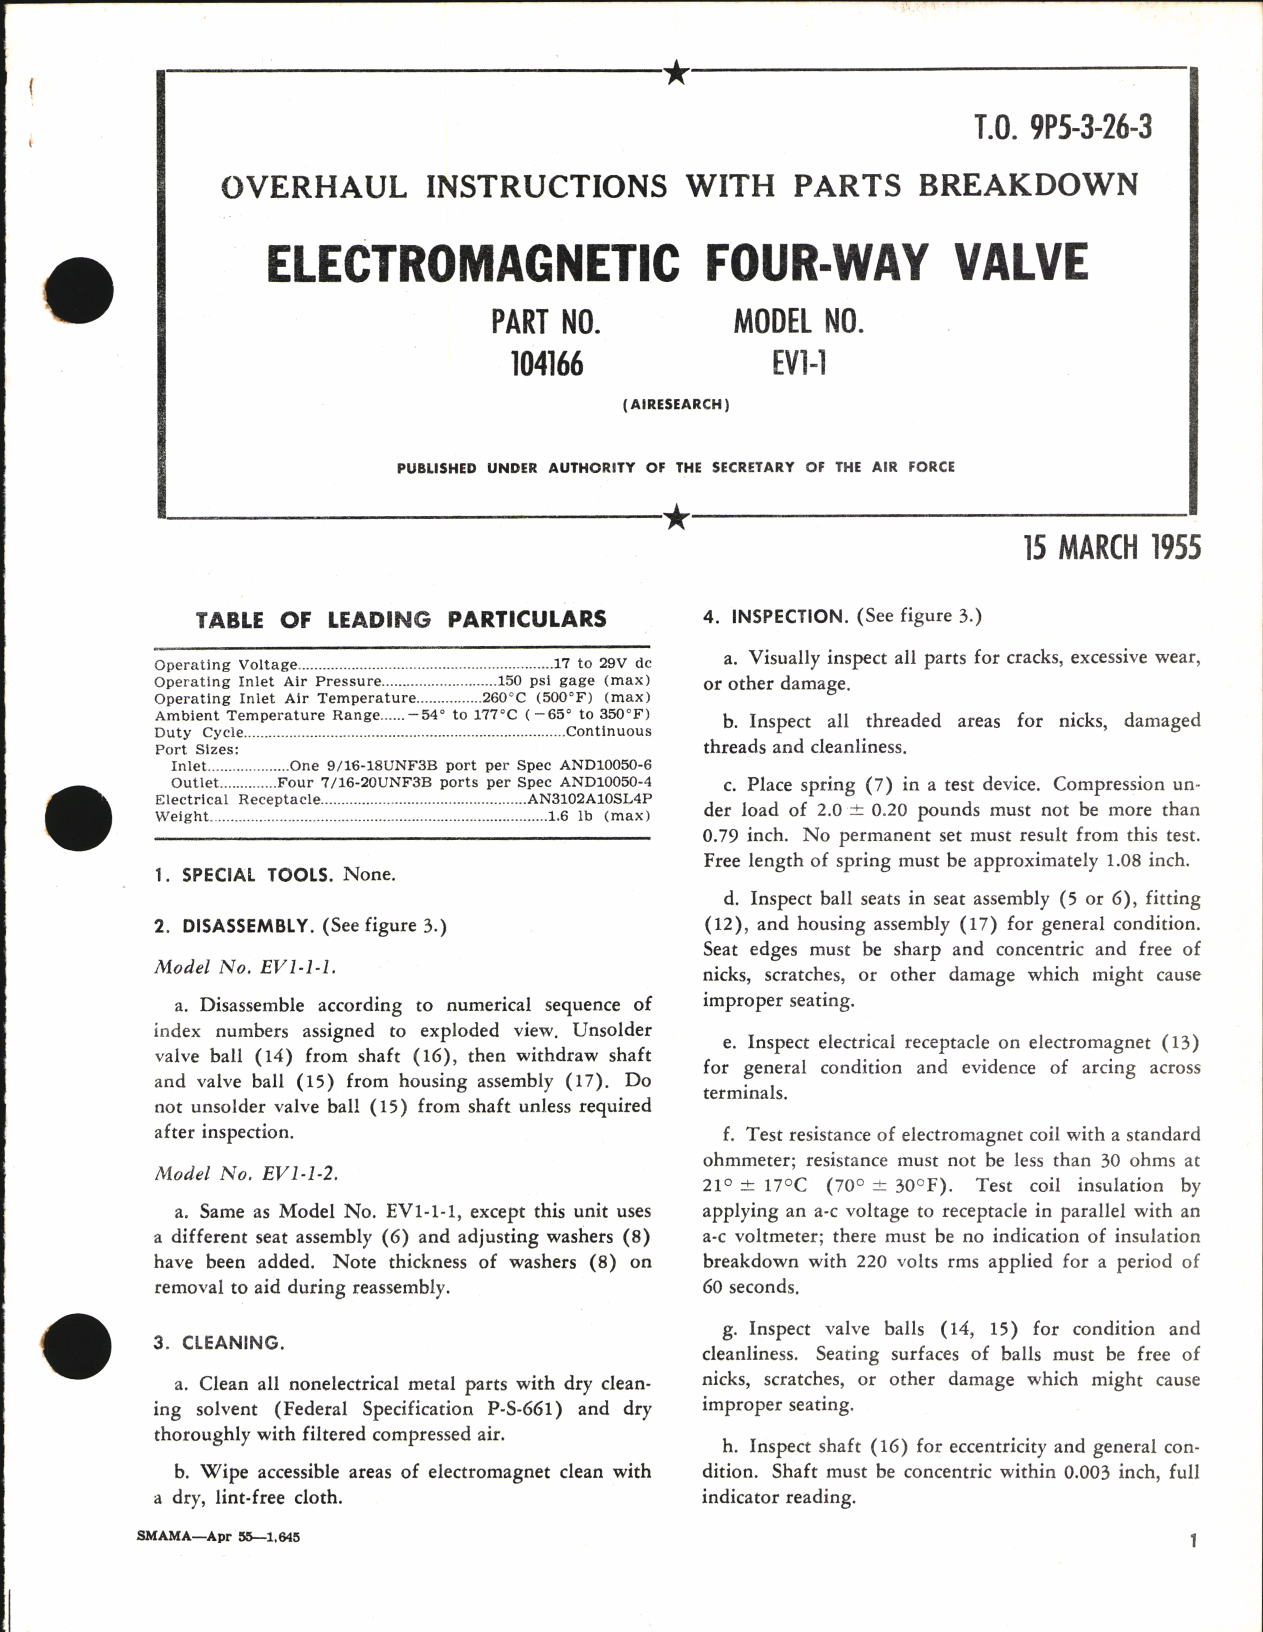 Sample page 1 from AirCorps Library document: Overhaul Instructions with Parts Breakdown for Electro Magnetic Four-Way Valve Part no. 104166, Model No. EV1-1